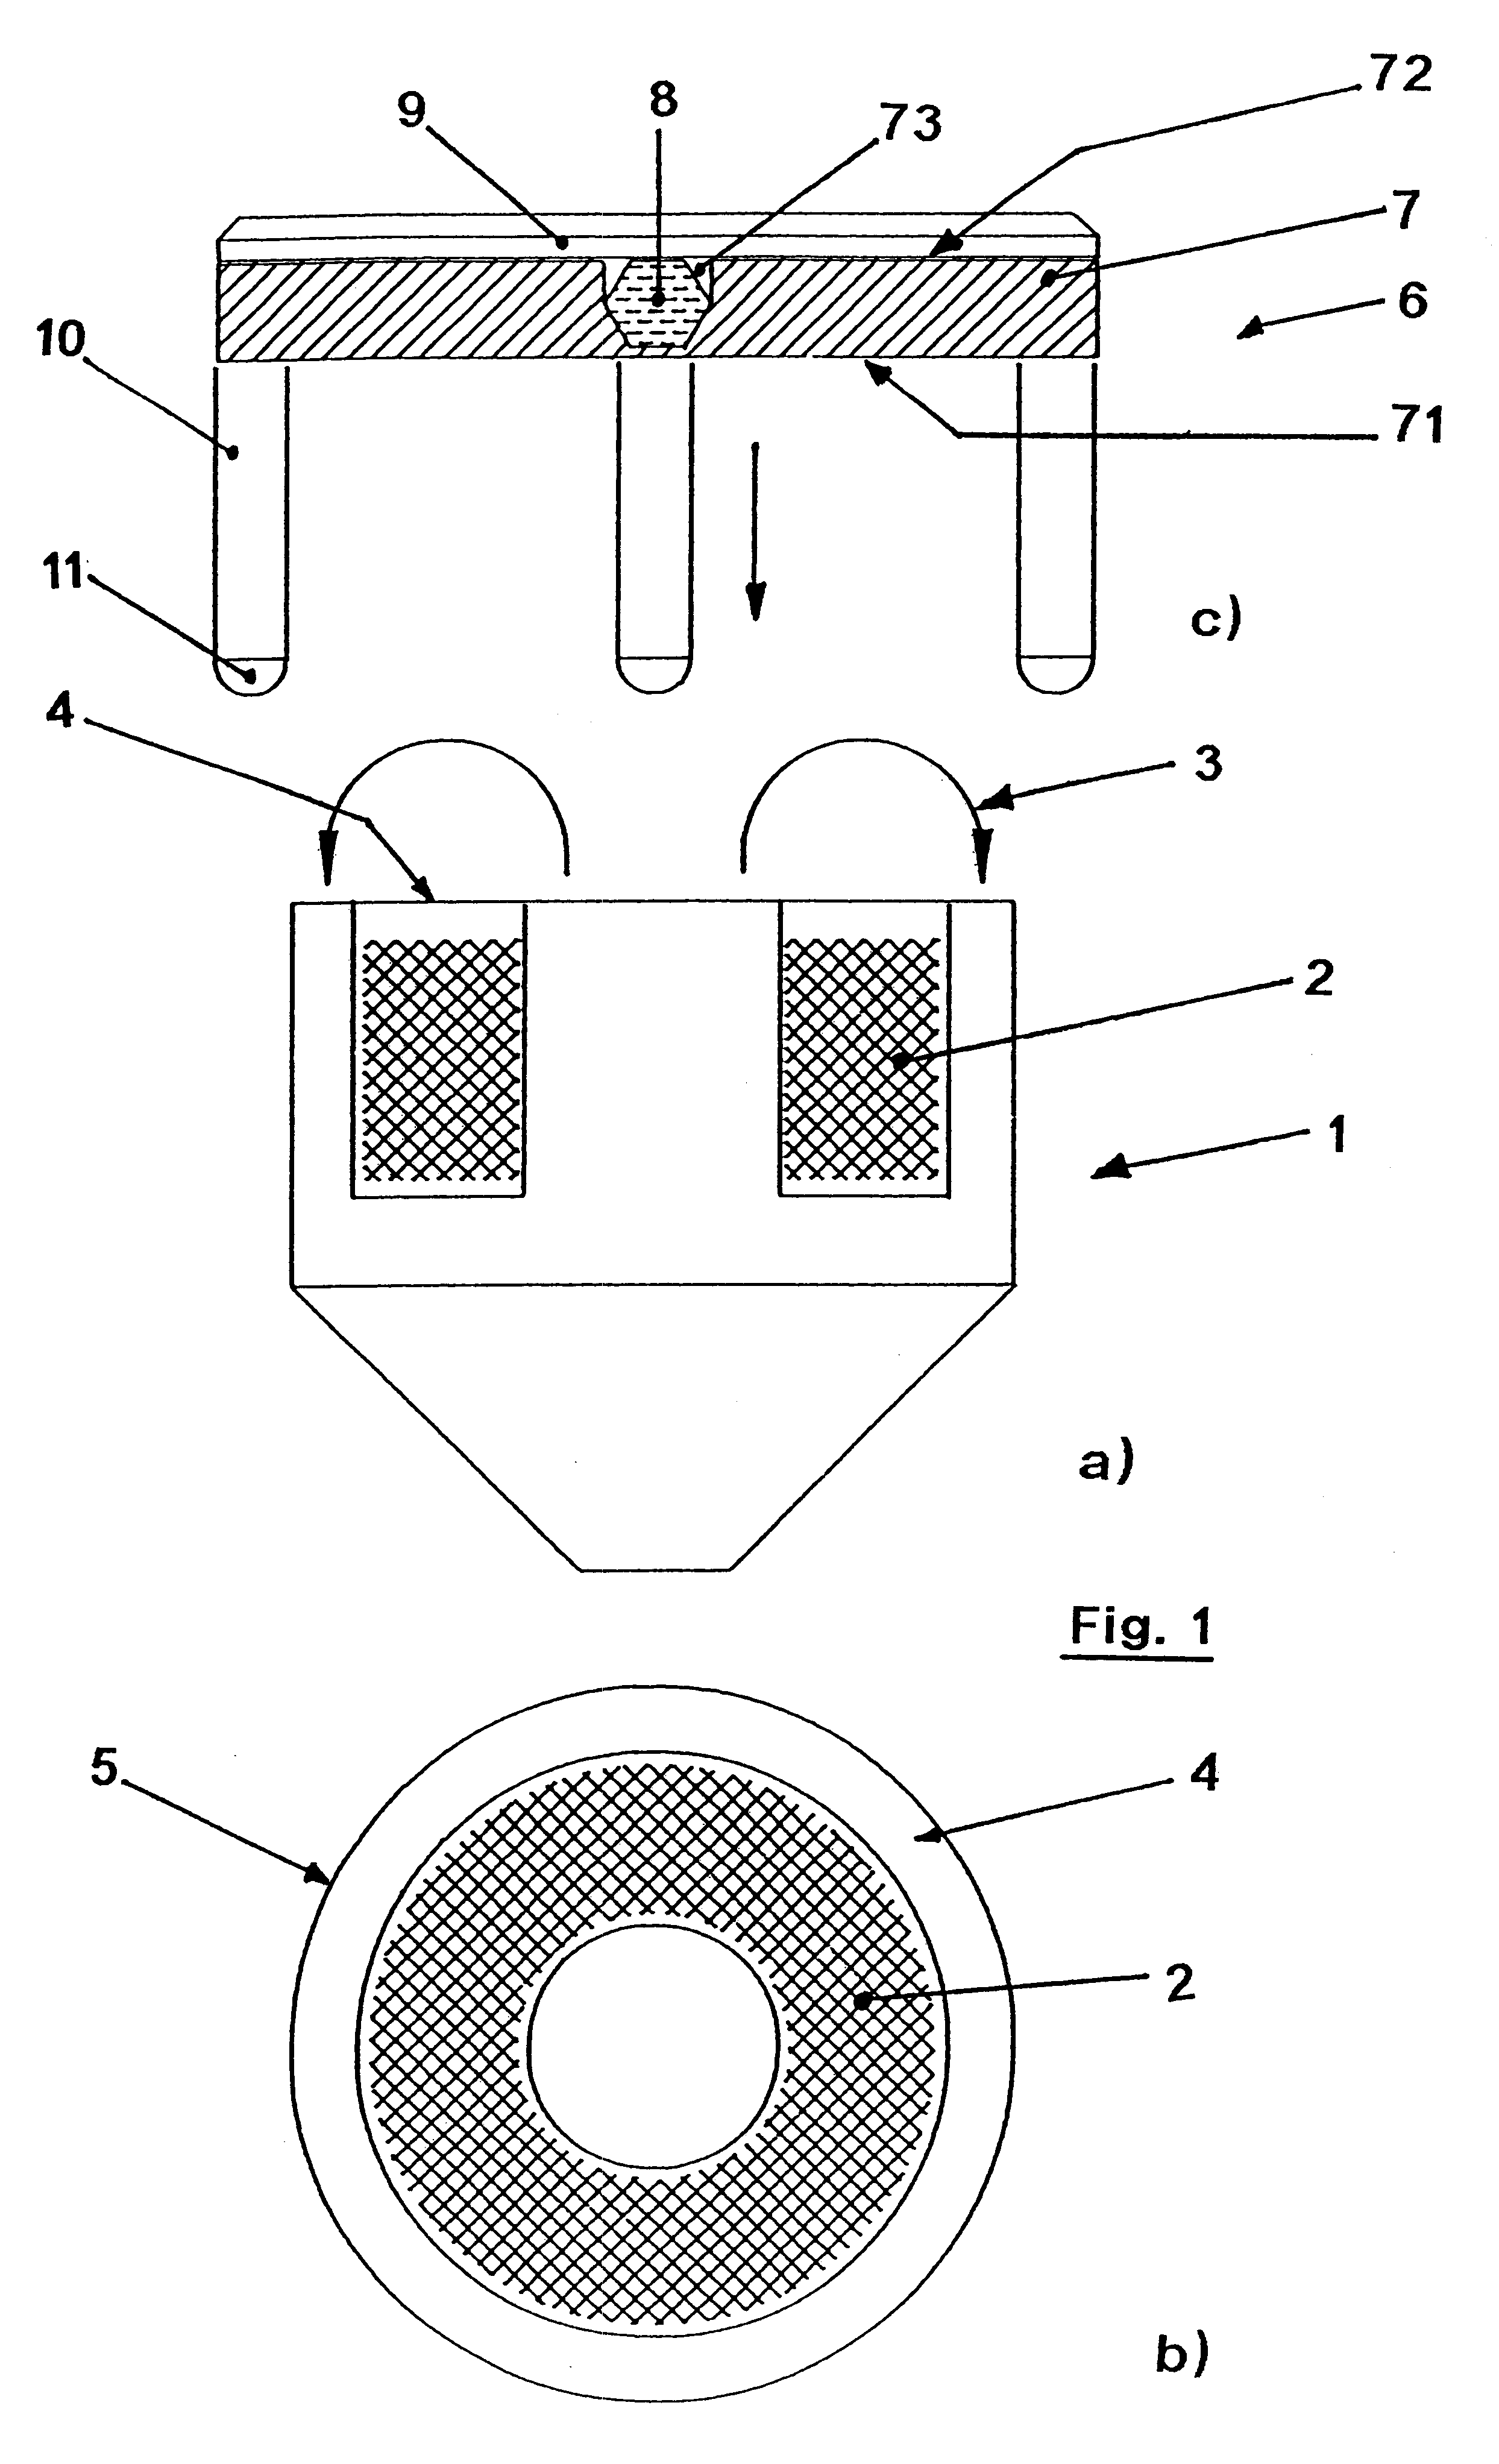 Fixing device for at least one operating element suitable for application in sterile areas in surgical operations, such as a surgical instrument